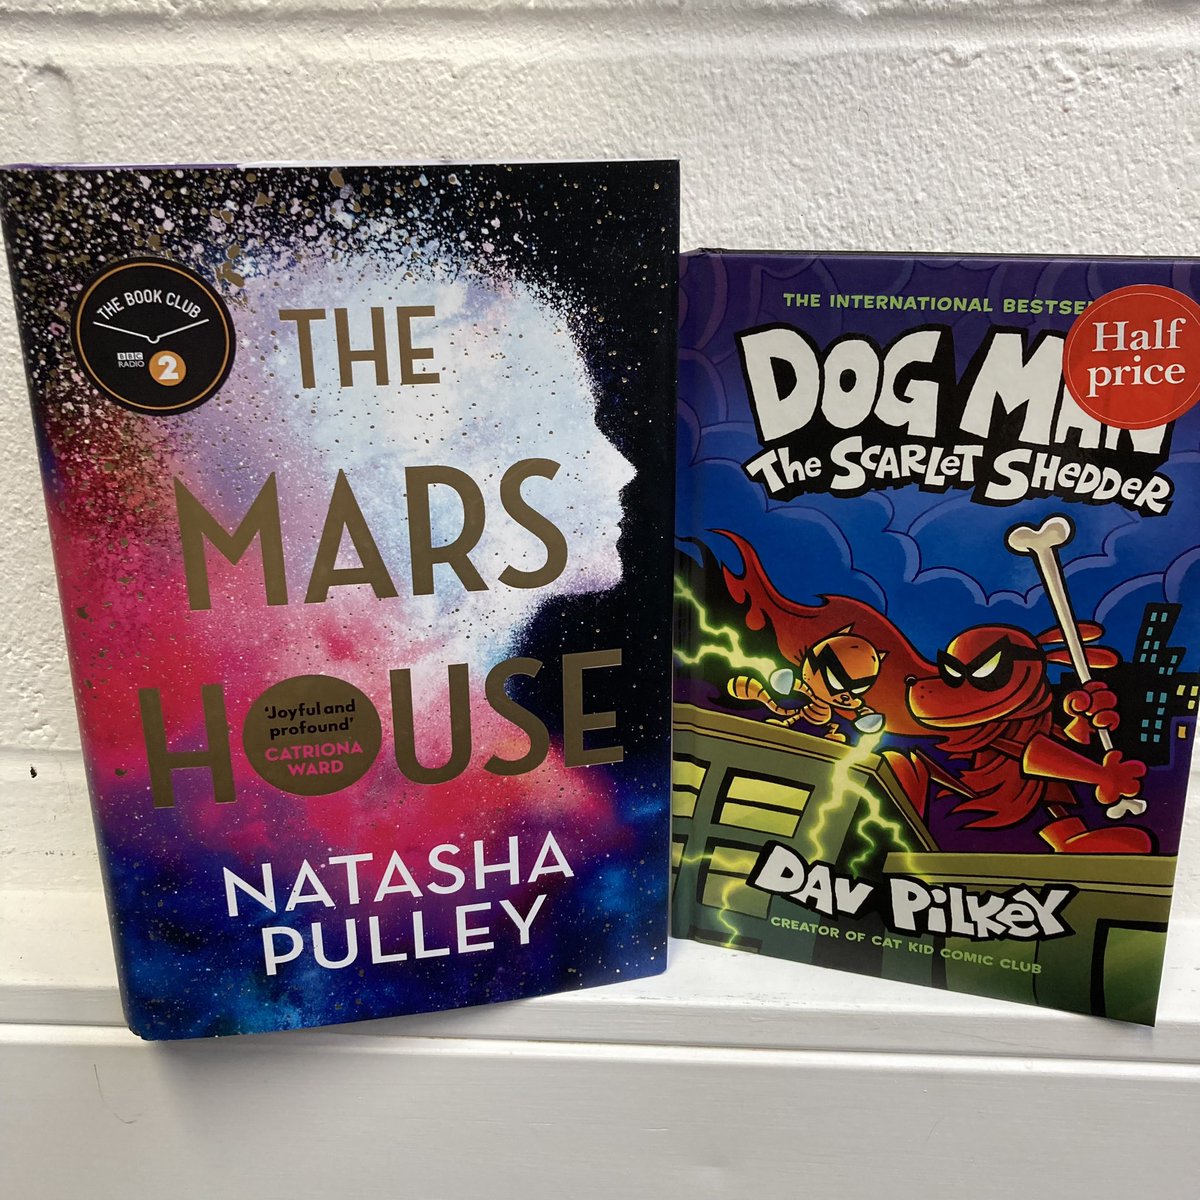 Today is an excellent new book day! New @natasha_pulley for me and new #dogman book for smallest child. I know what we’ll be doing later! #NewBook #TheMarsHouse